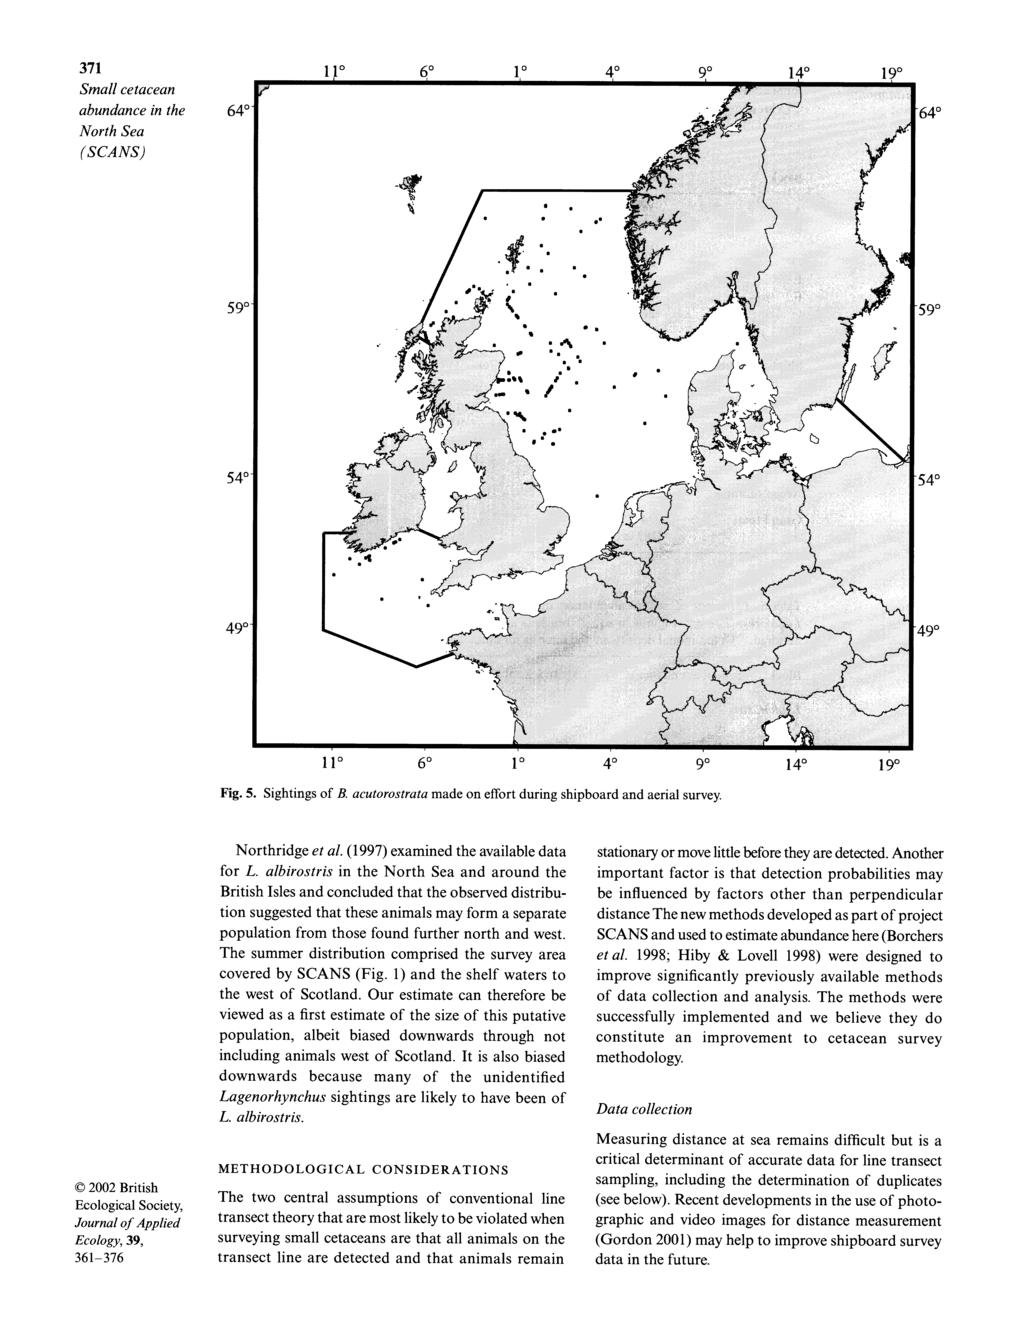 371 Small cetacean abundance in the North Sea (SCANS) 64 64 59-59 54 54 49-49 11 1 4 9 14 19" Fig. 5. Sightings of B. acutorostrata made on effort during shipboard and aerial survey.